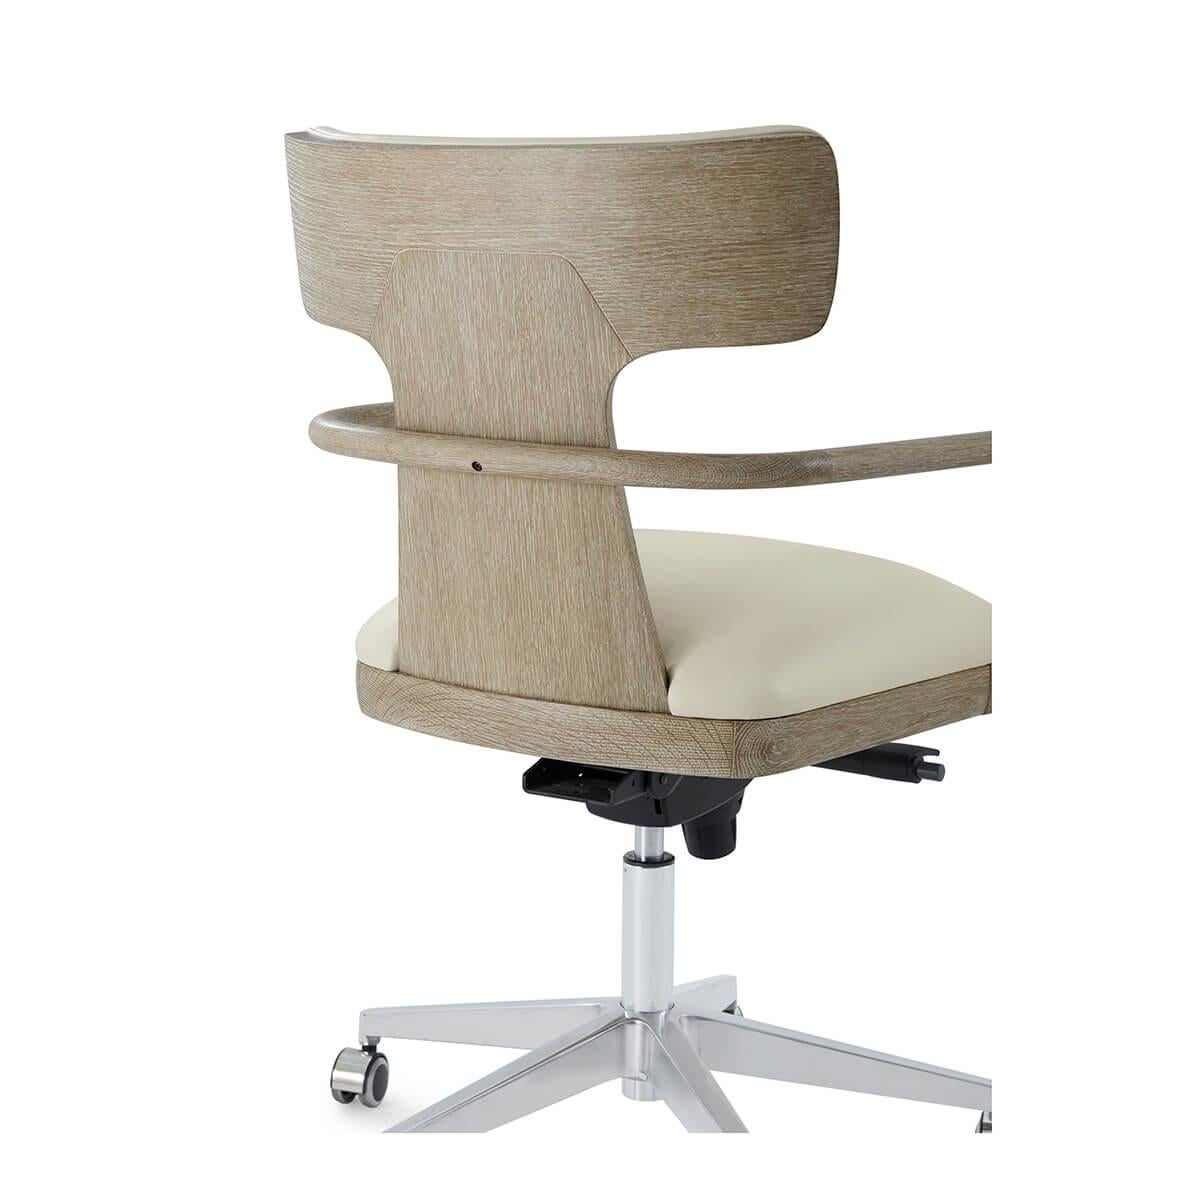 Contemporary Organic Modern Desk Chair For Sale